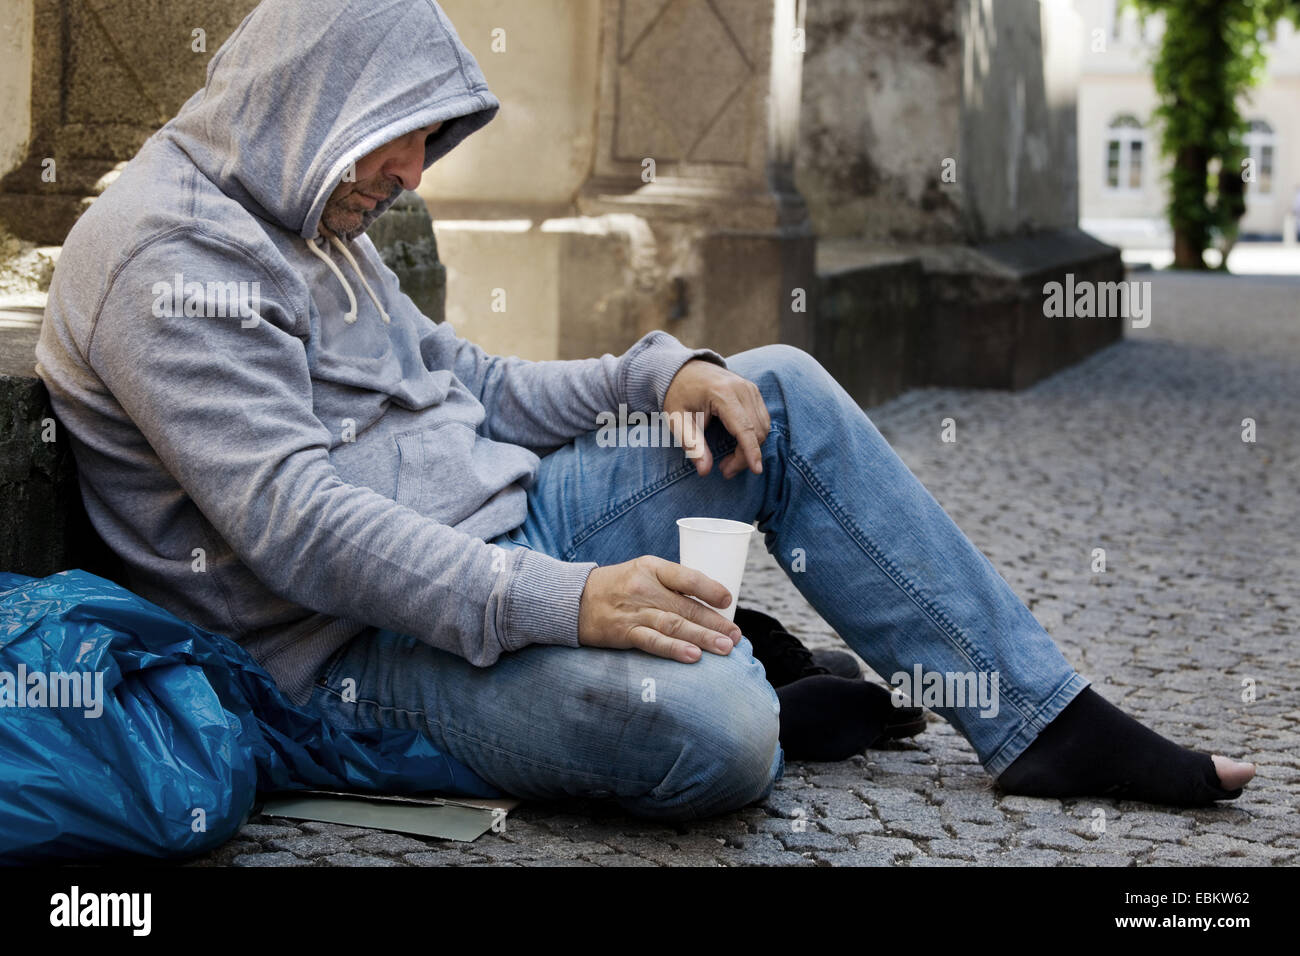 unemployed beggars living on the street, Germany Stock Photo